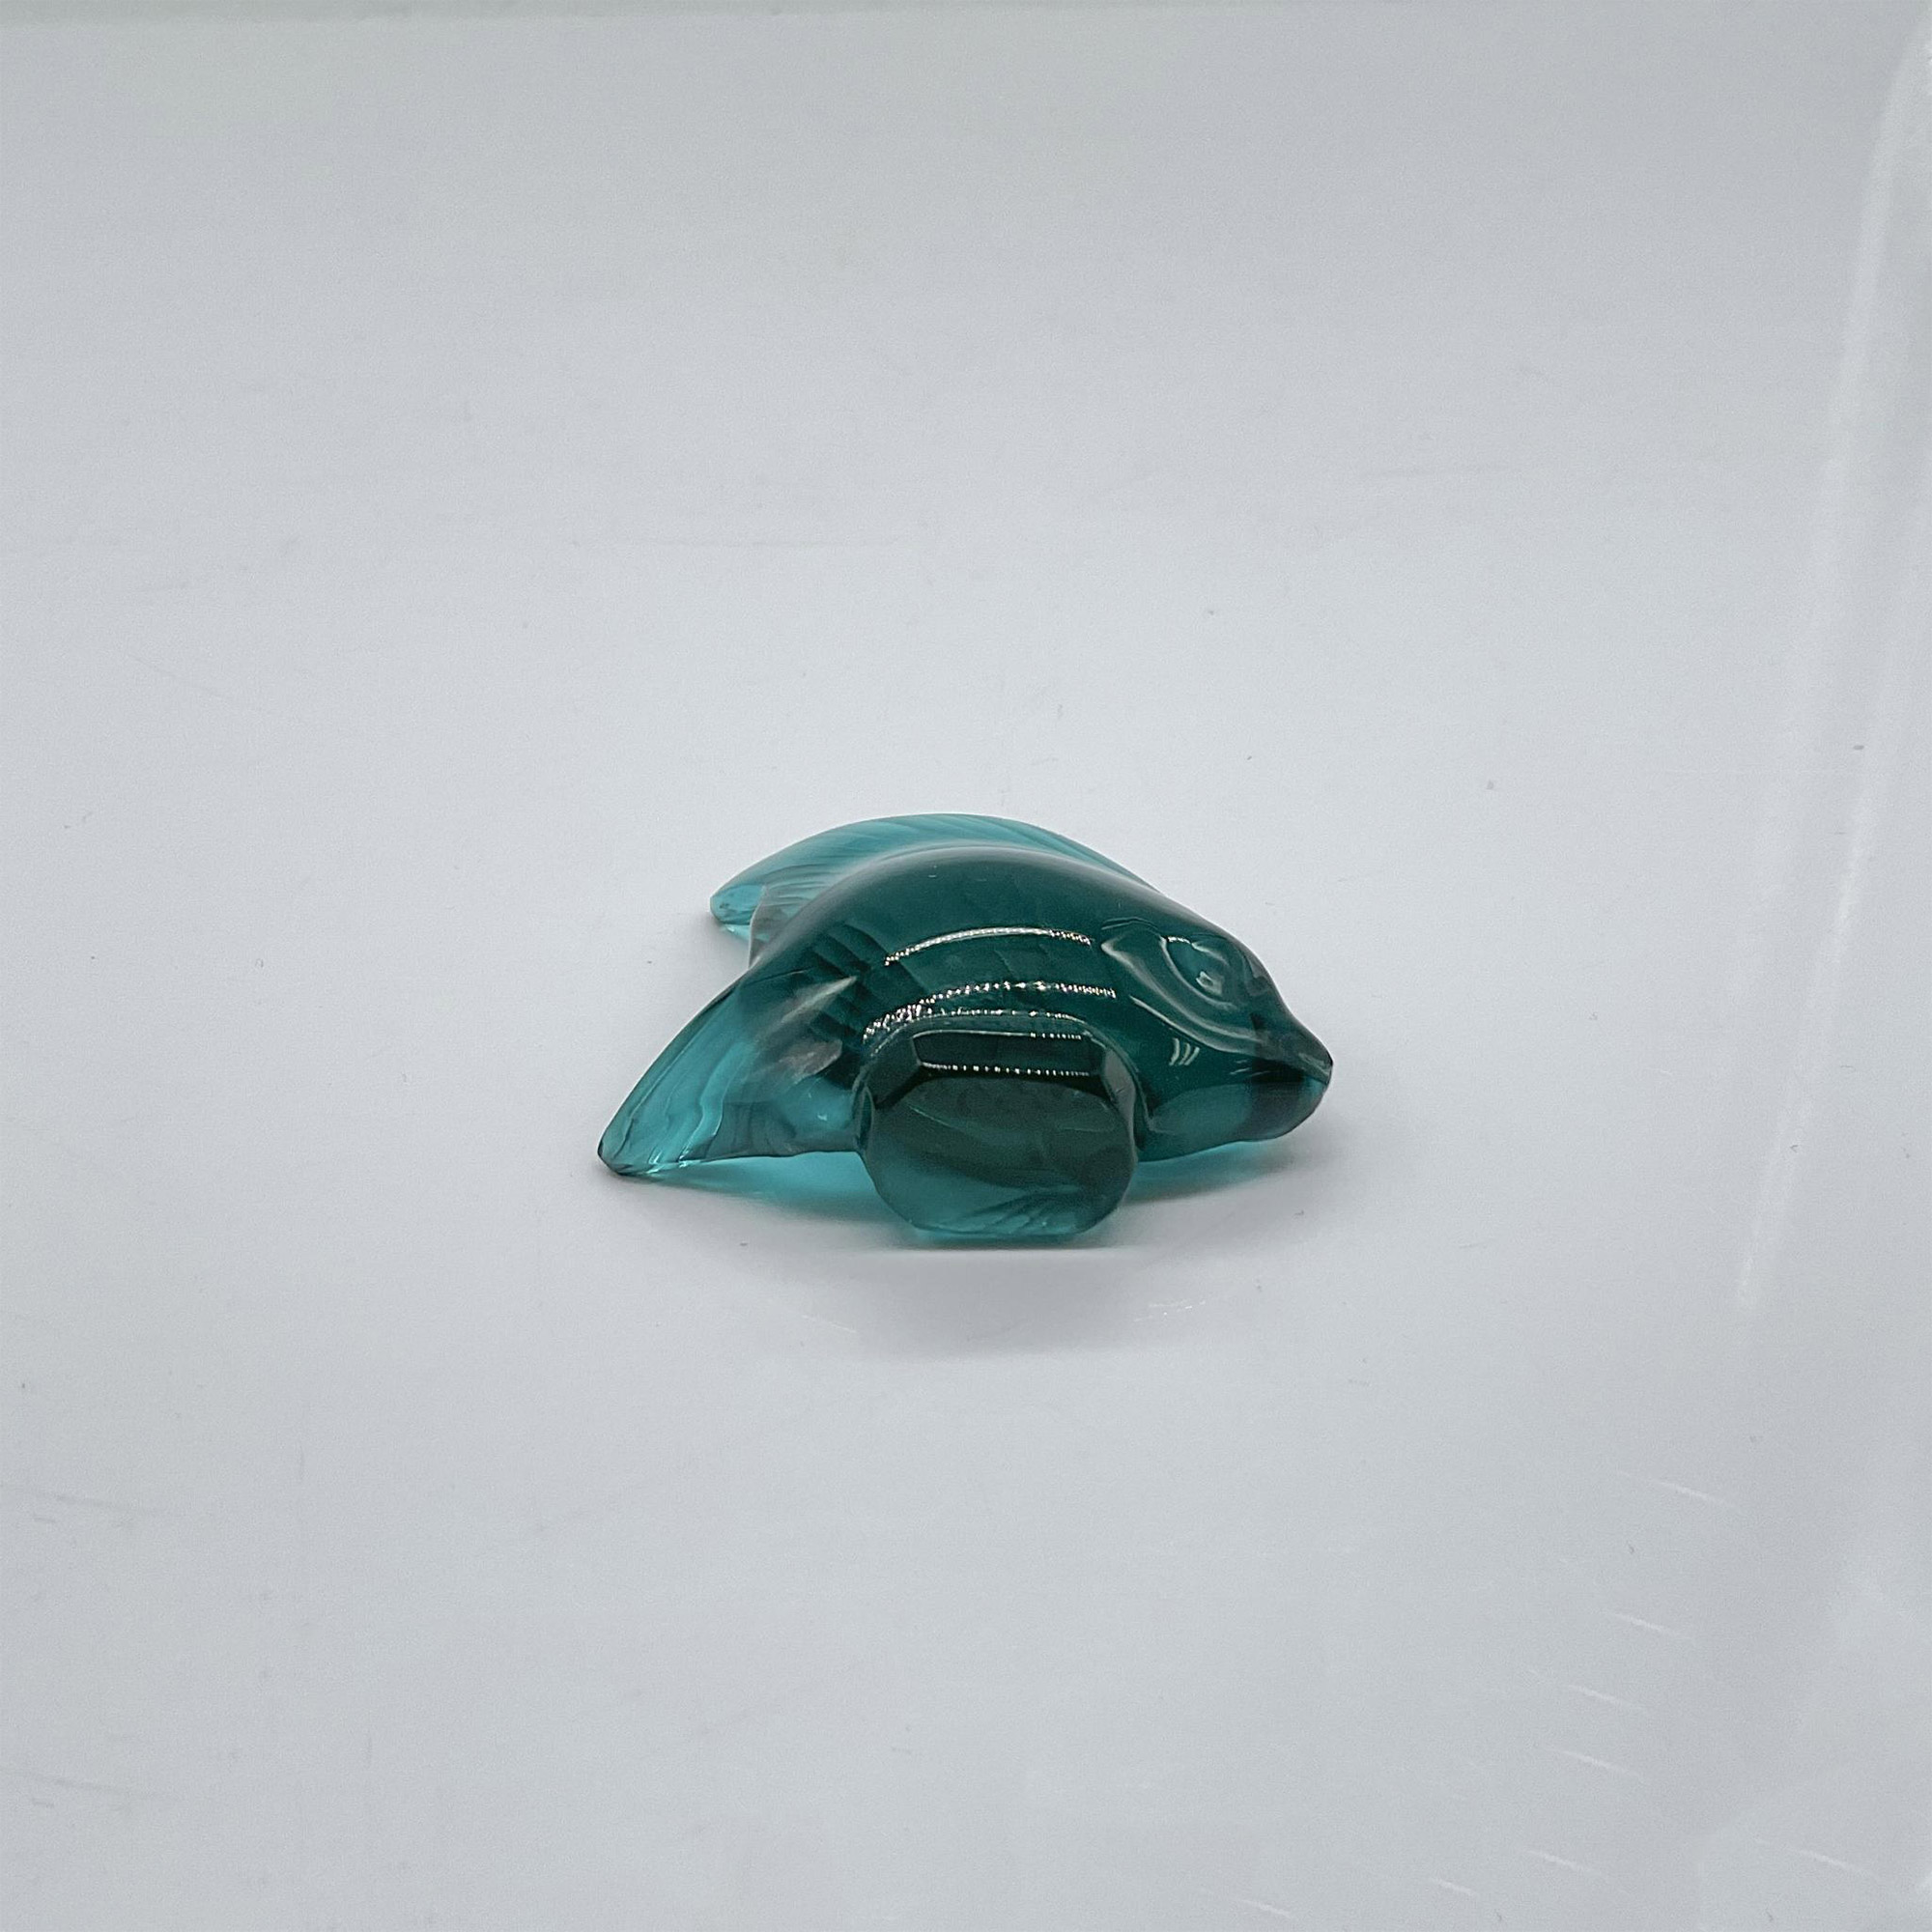 Lalique Crystal Blue Fish Figurine - Image 3 of 4